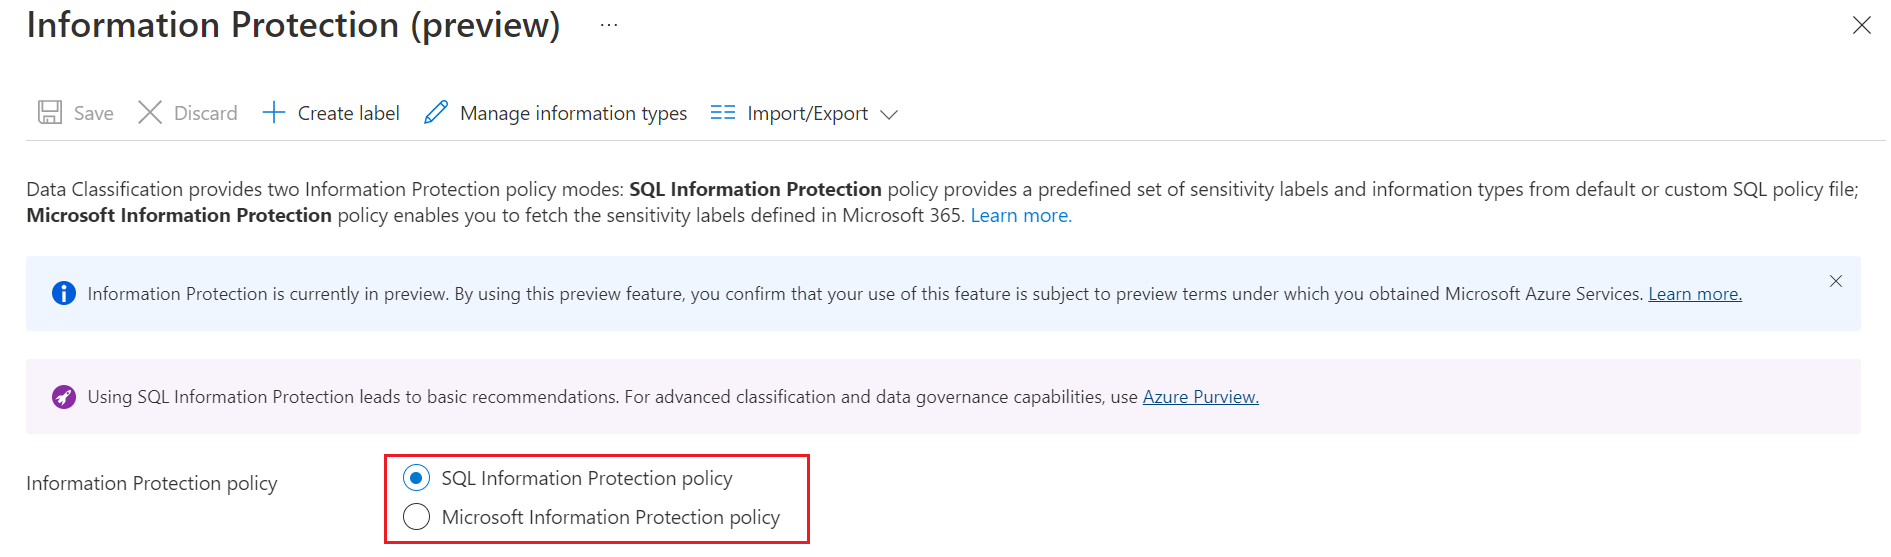 Screenshot of Information Protection policy types.